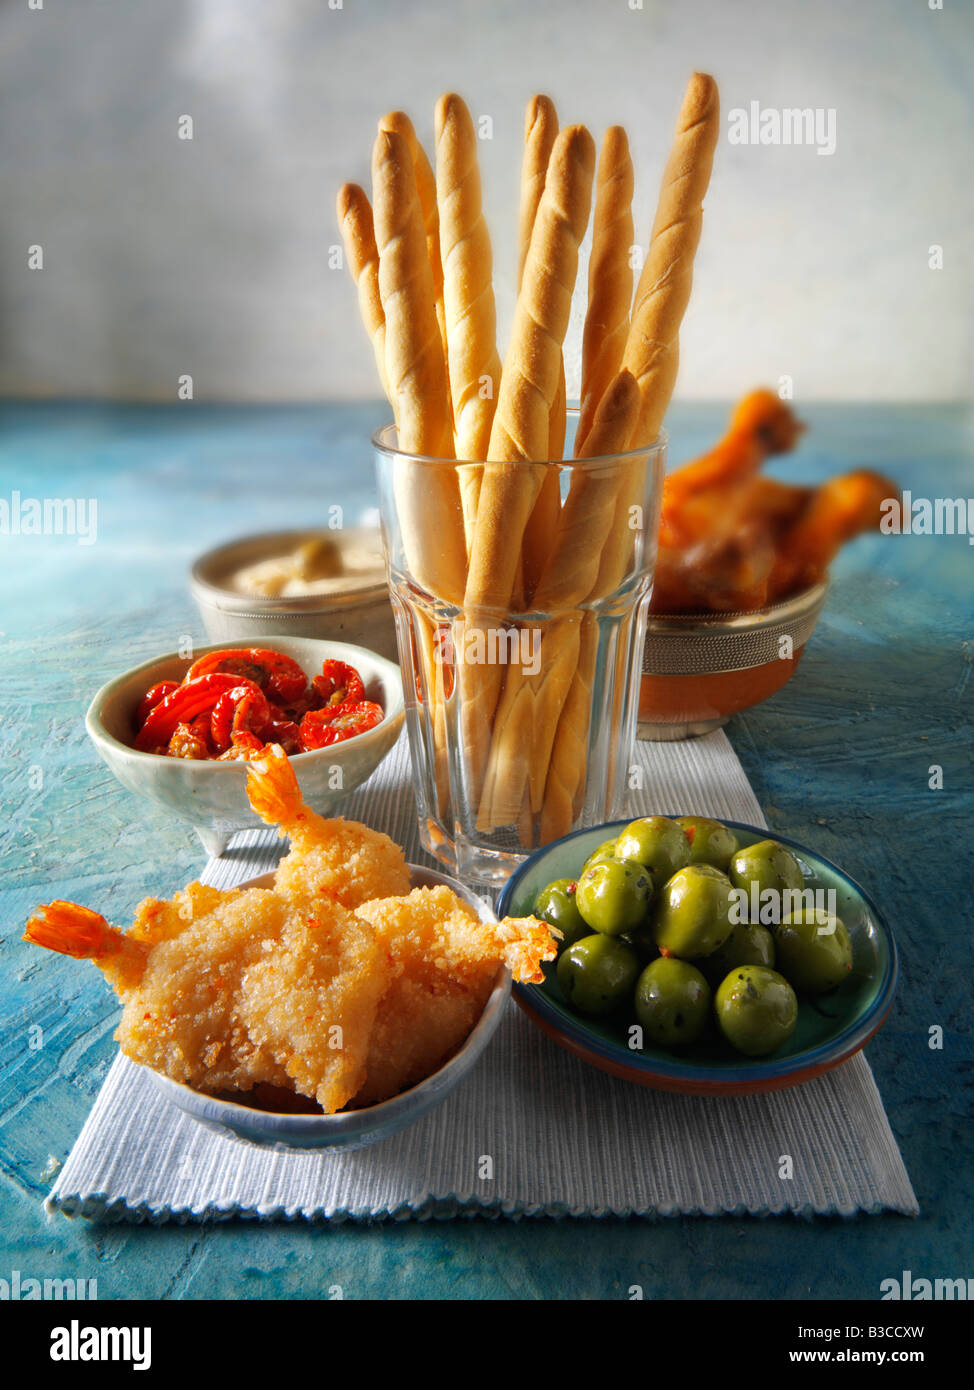 party food buffet with bread sticks, deep fried breaded prawns, green olives, marinated sun dried tomatoes, bbq chicken Stock Photo